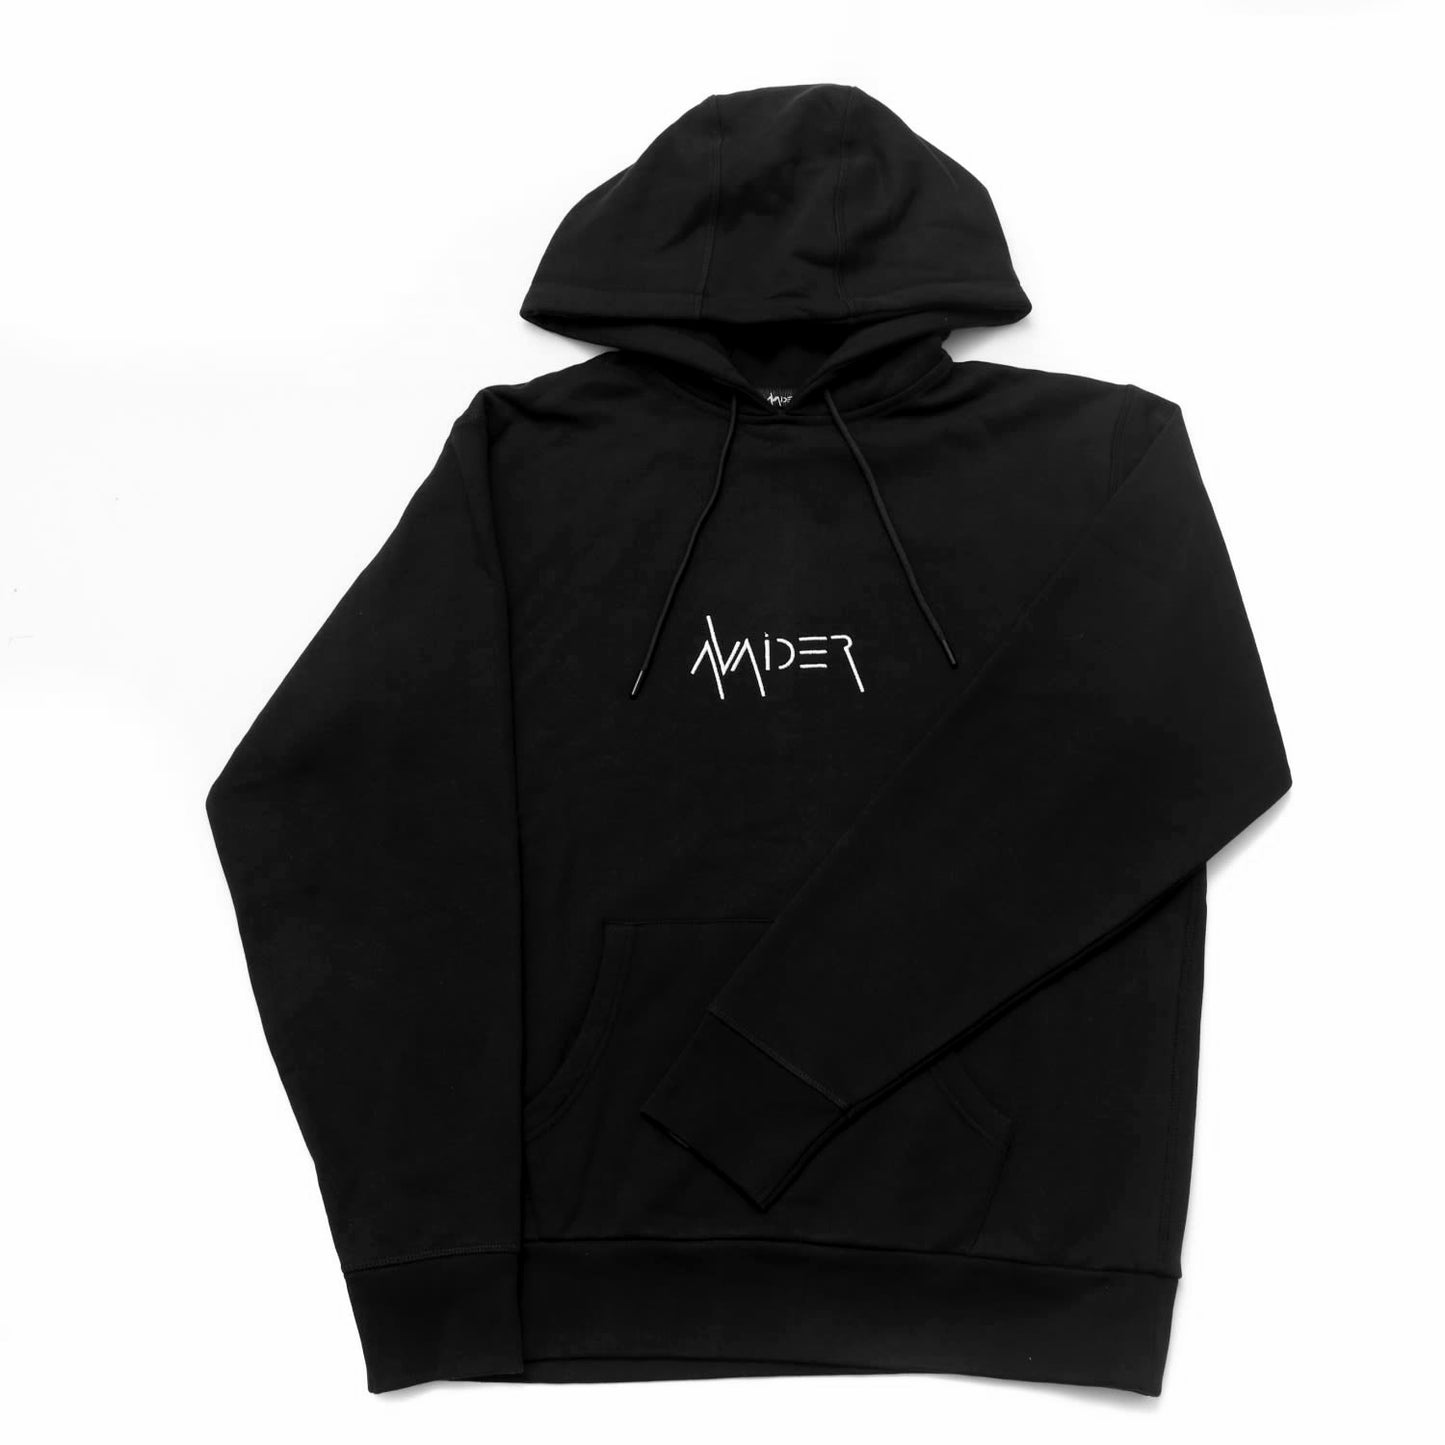 UPLAND HEAVYWEIGHT HOODIE WITH EMBROIDERED LOGO AND BACK PRINT IN BLACK AND WHITE